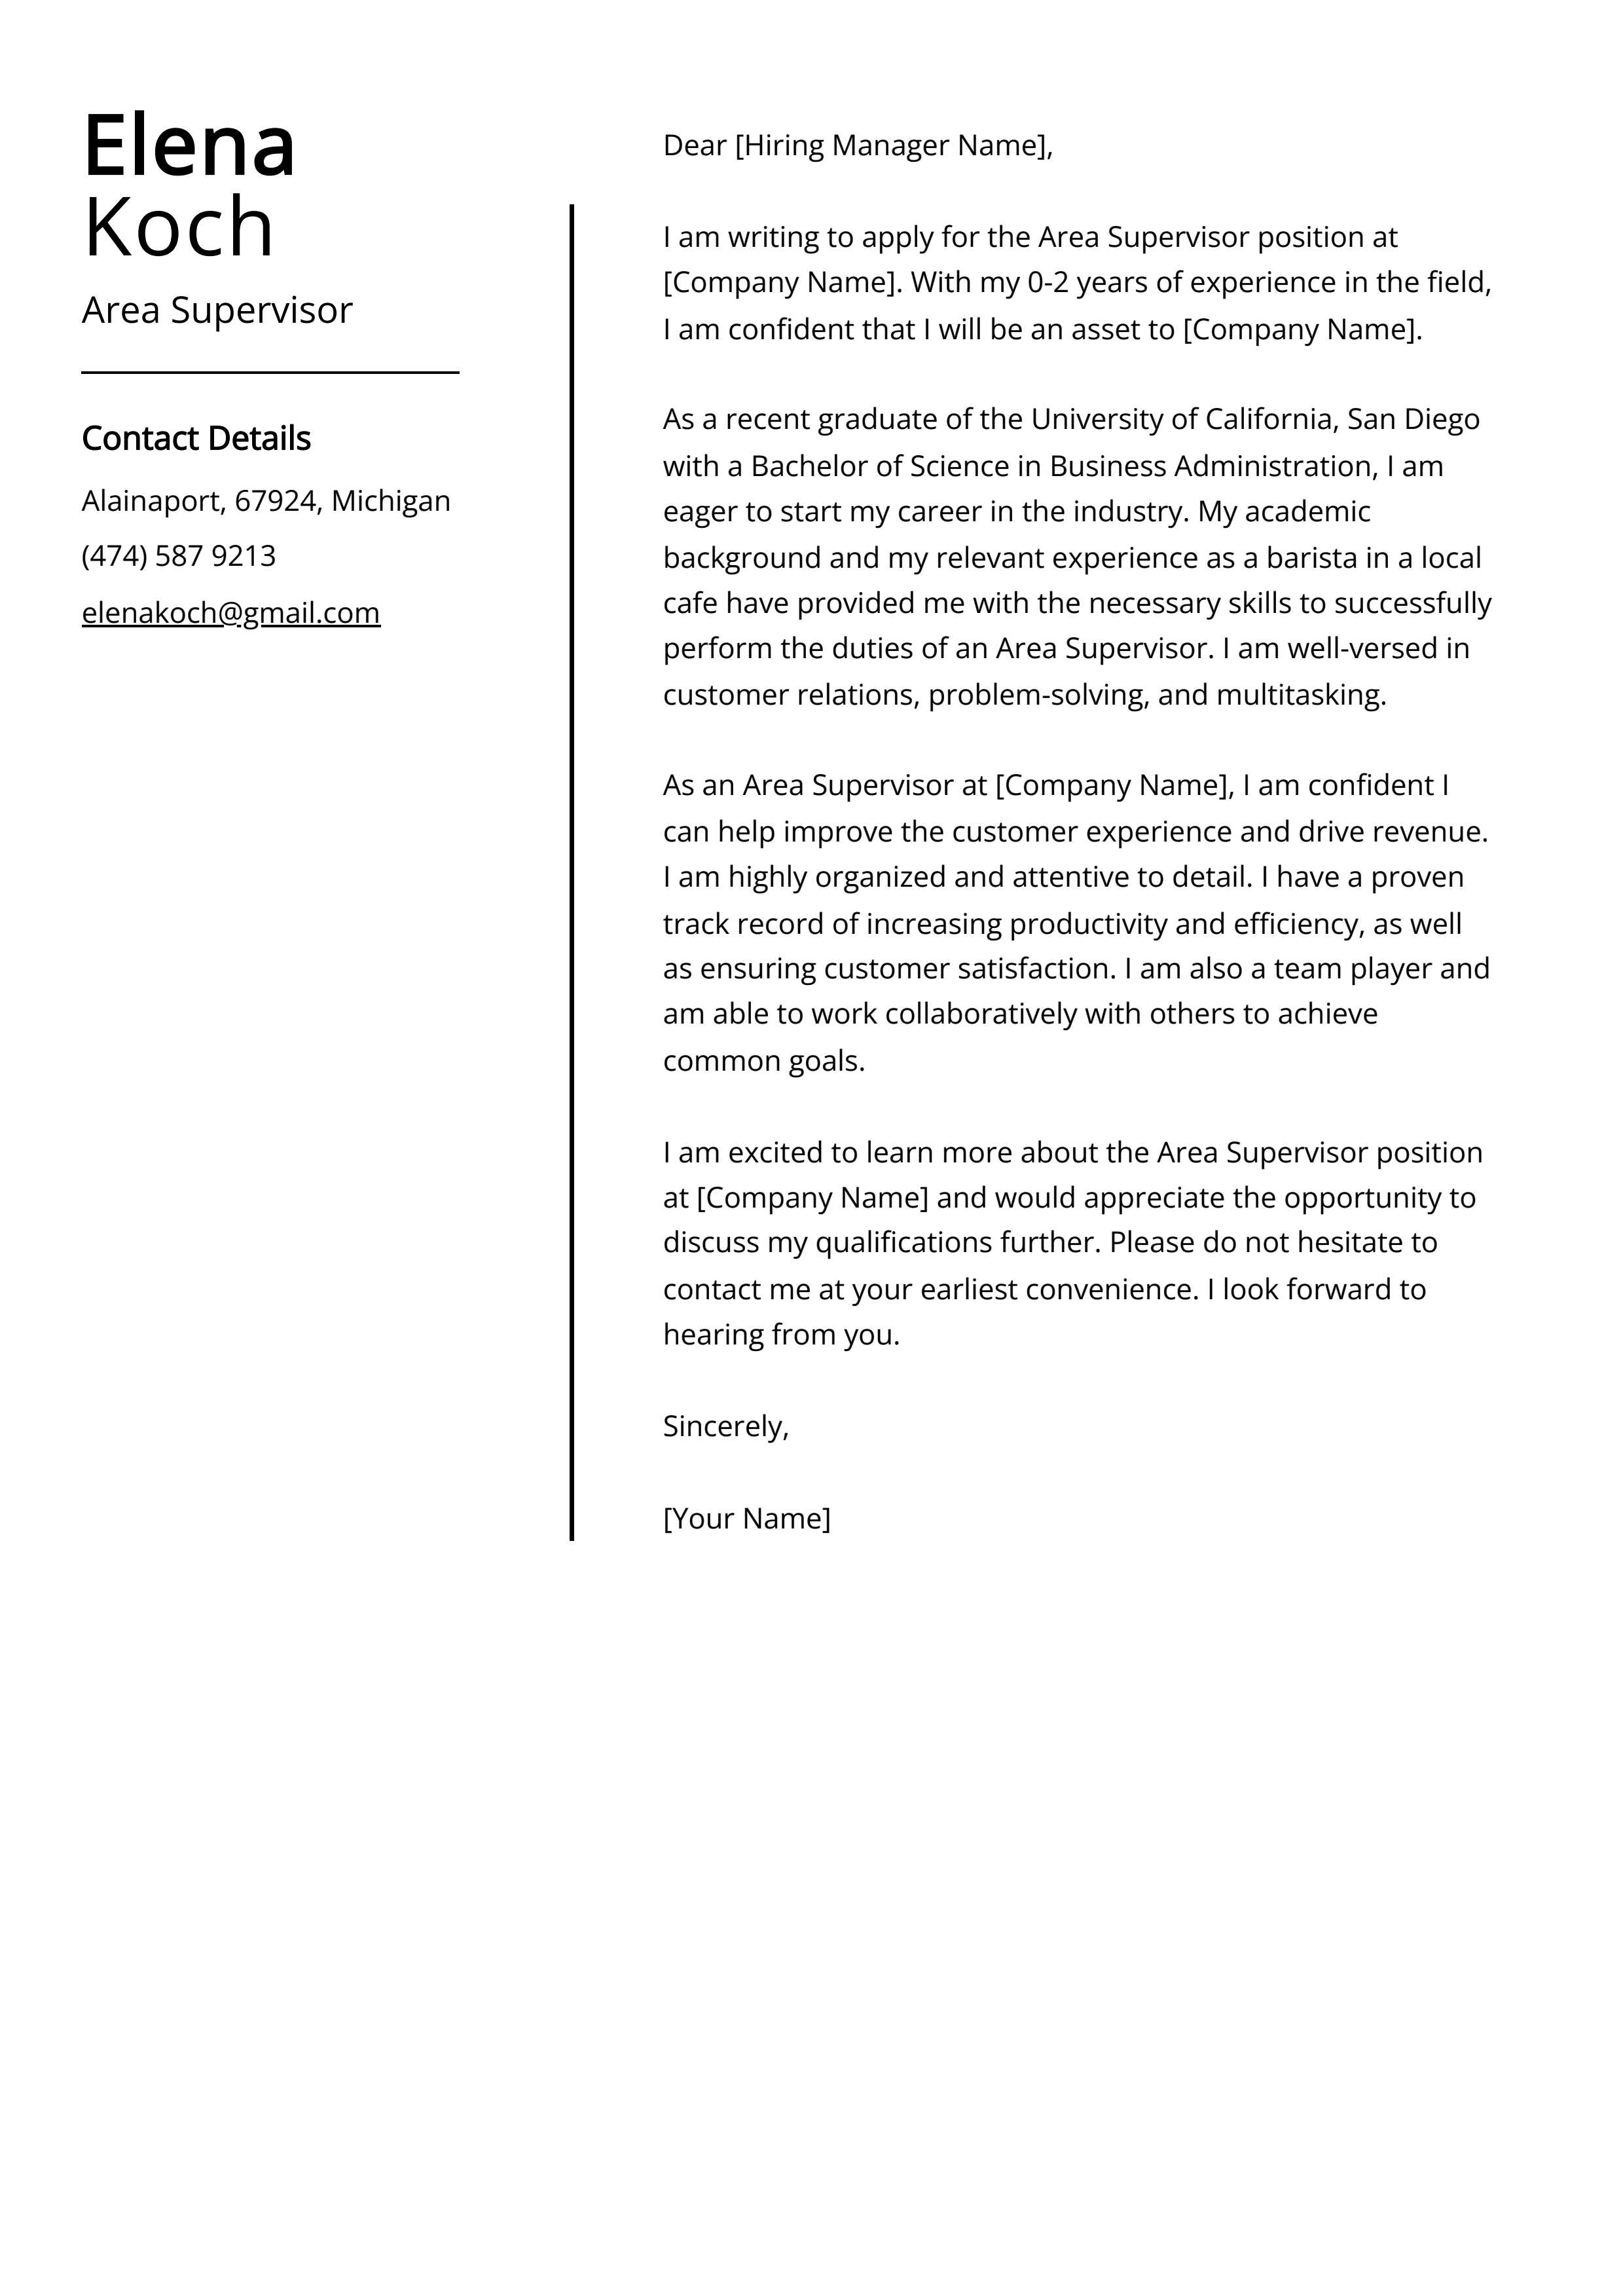 Area Supervisor Cover Letter Example